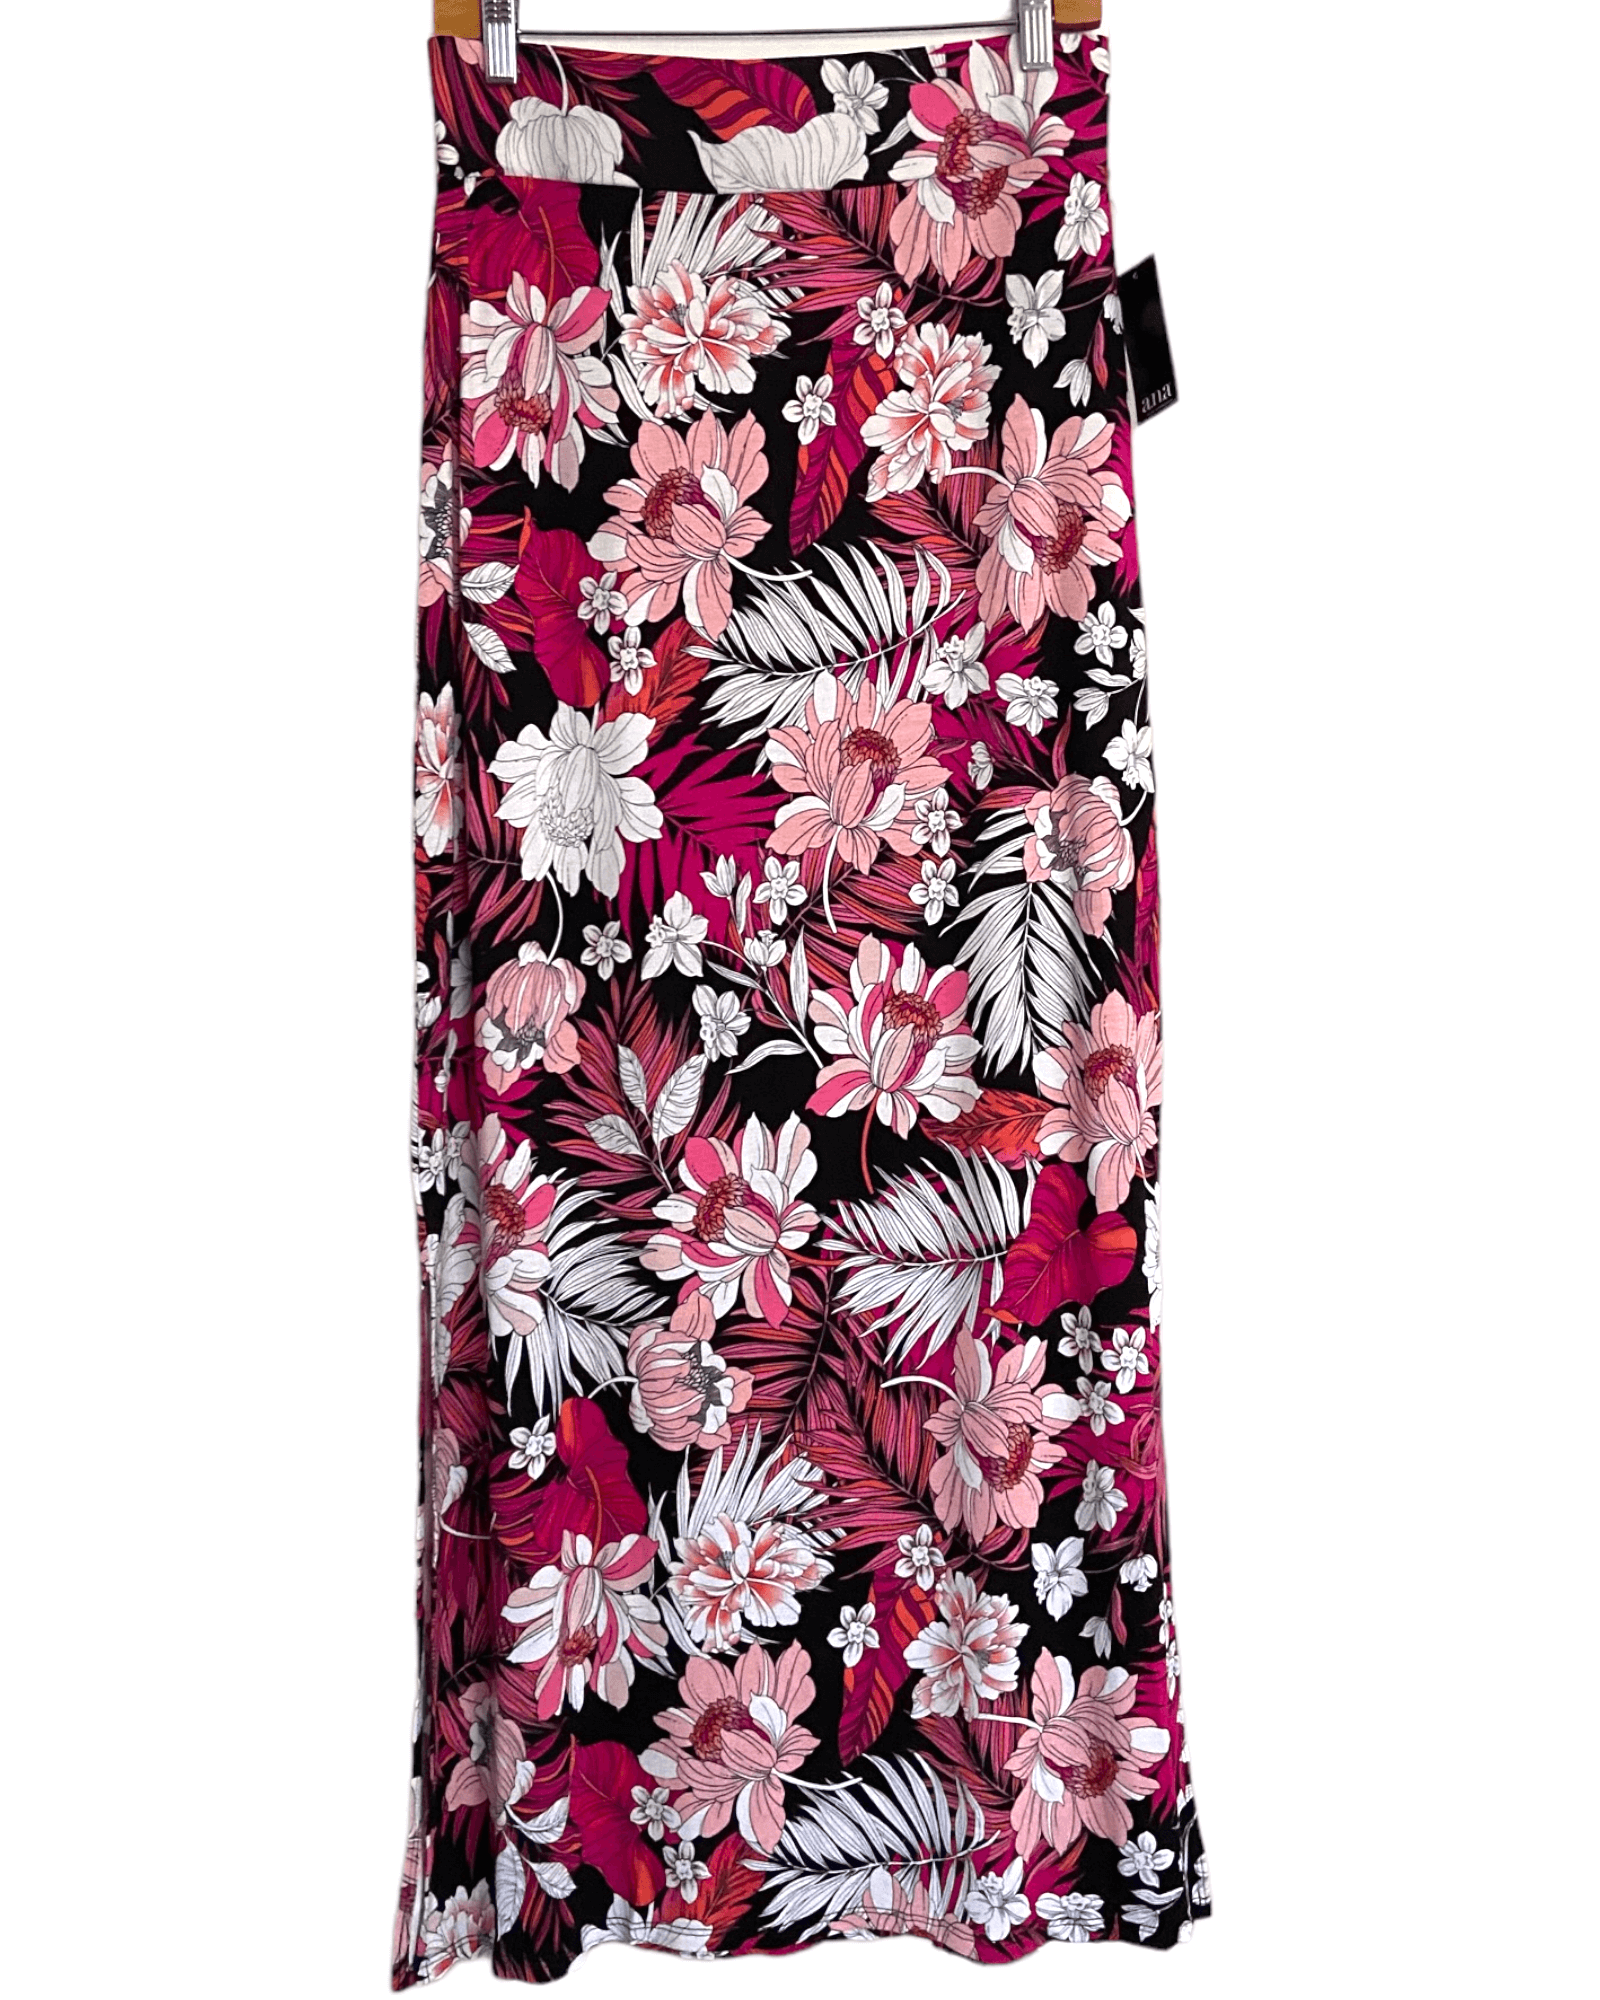 Bright Spring A NEW APPROACH pink bella tropic print maxi skirt